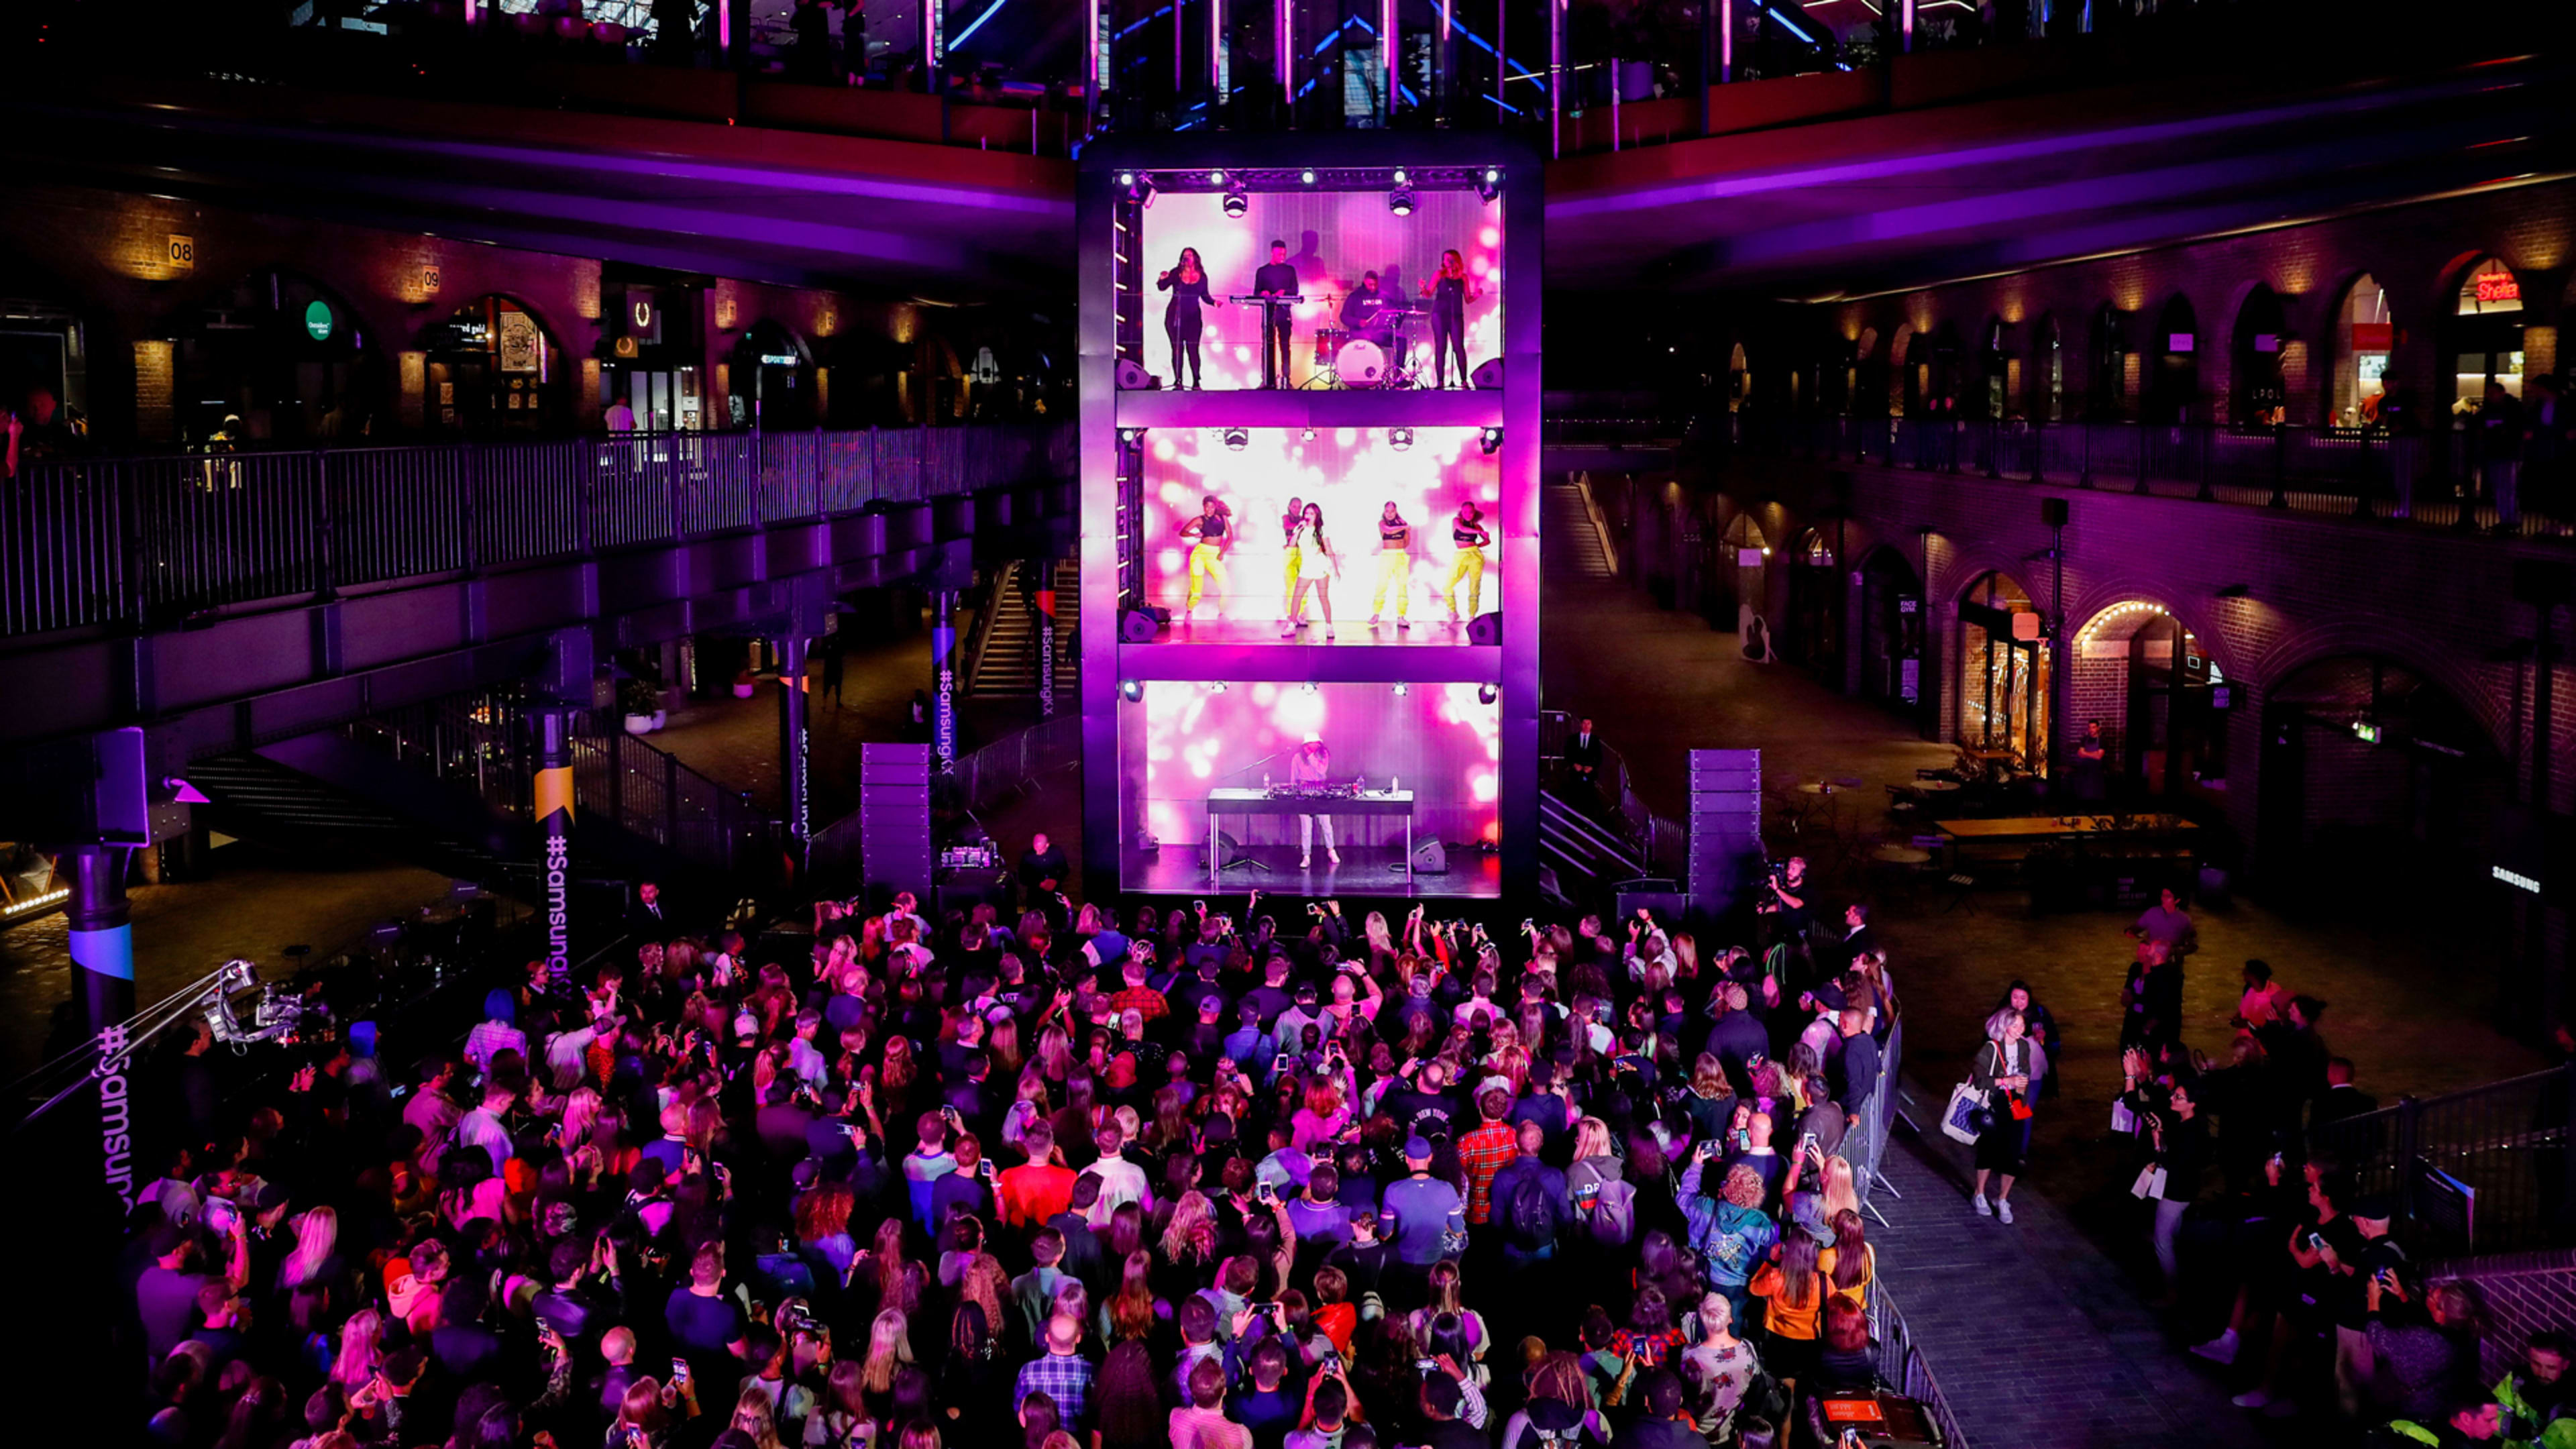 Vertical video has won so much, Samsung made a concert stage optimized for your phone